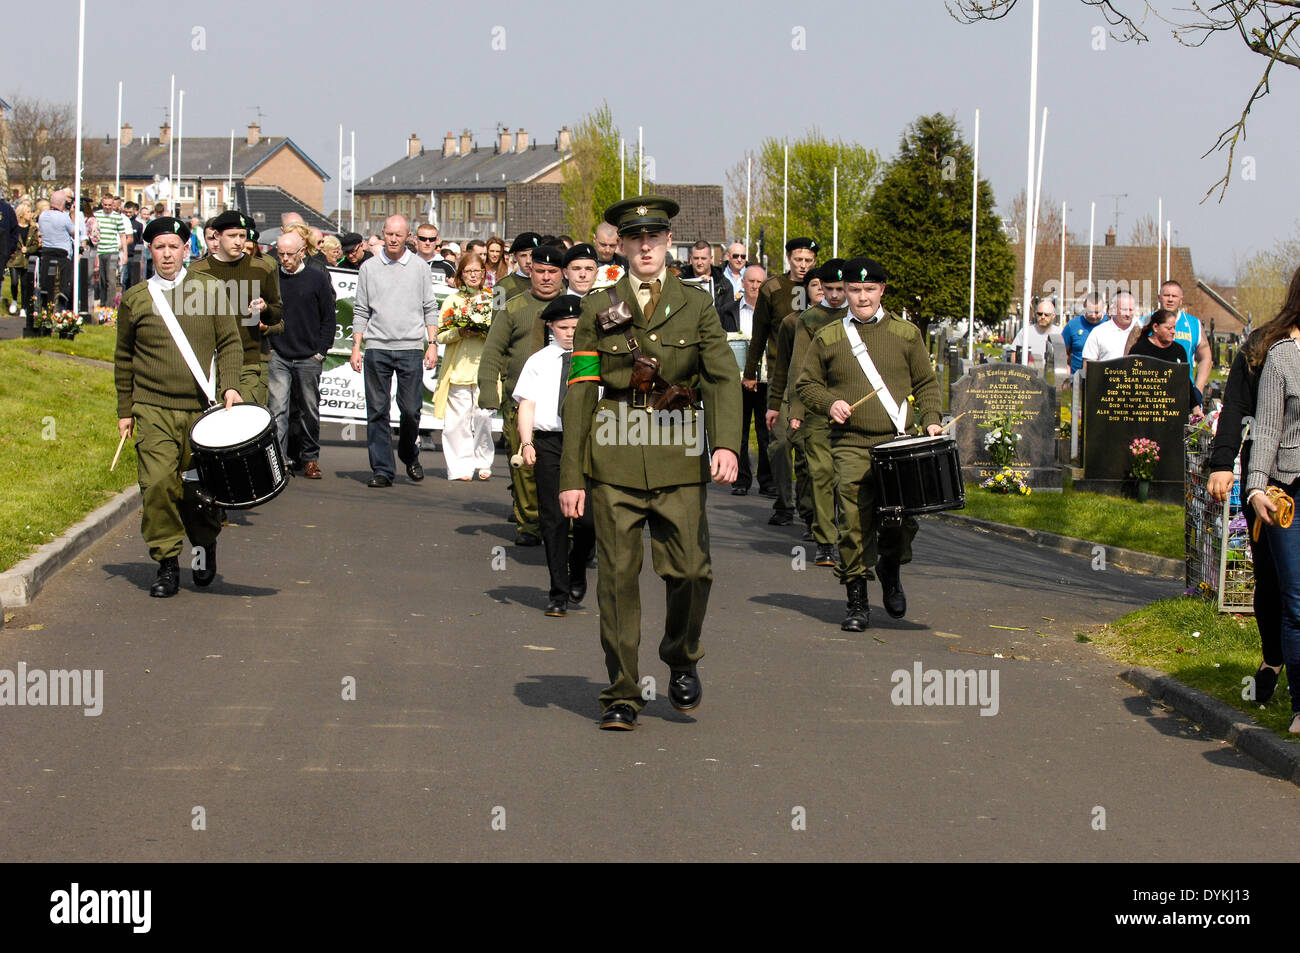 Derry, Londonderry, Northern Ireland. 21st April, 2014. Dissident Republicans Commemorate Easter Rising. A republican band dressed in paramilitary uniforms attends the dissident Irish republican 32 County Sovereignty Movement parade to the City Cemetery in Derry to commemorate the 1916 Easter Rising. Credit: George Sweeney / Alamy Live News Stock Photo